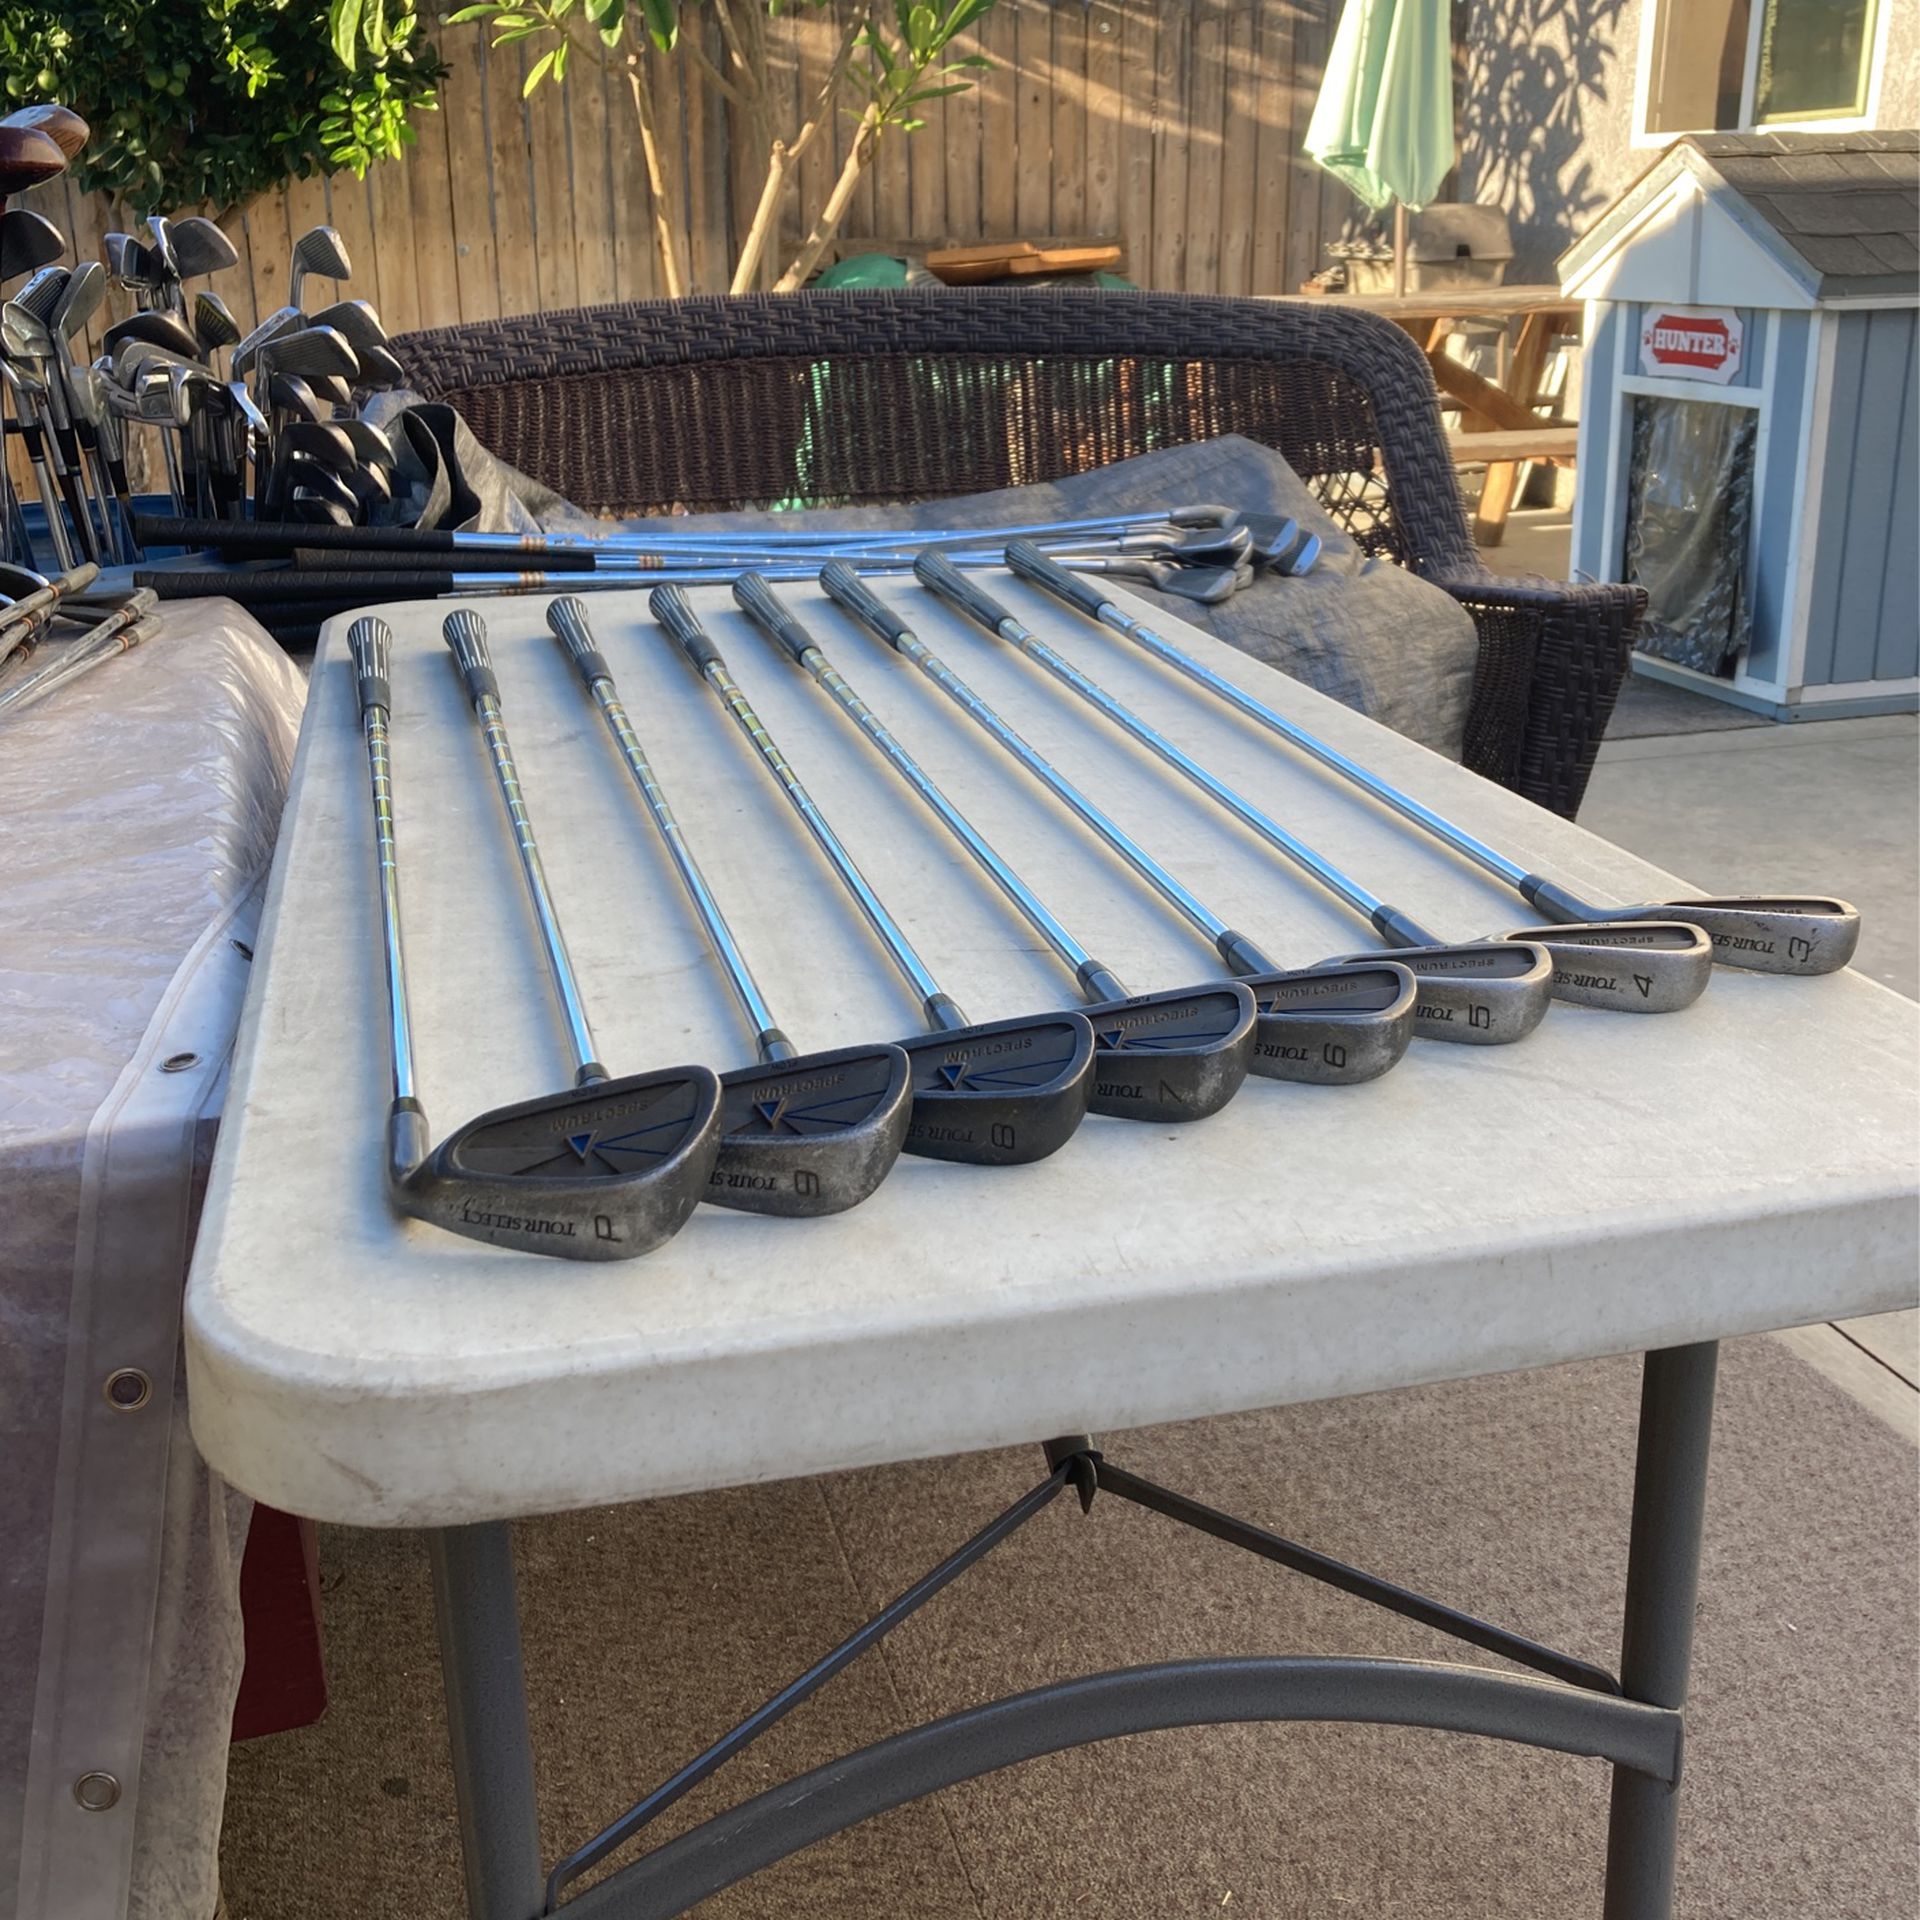 Golf Clubs Tour Select Irons 3-pw. Excellent. $40